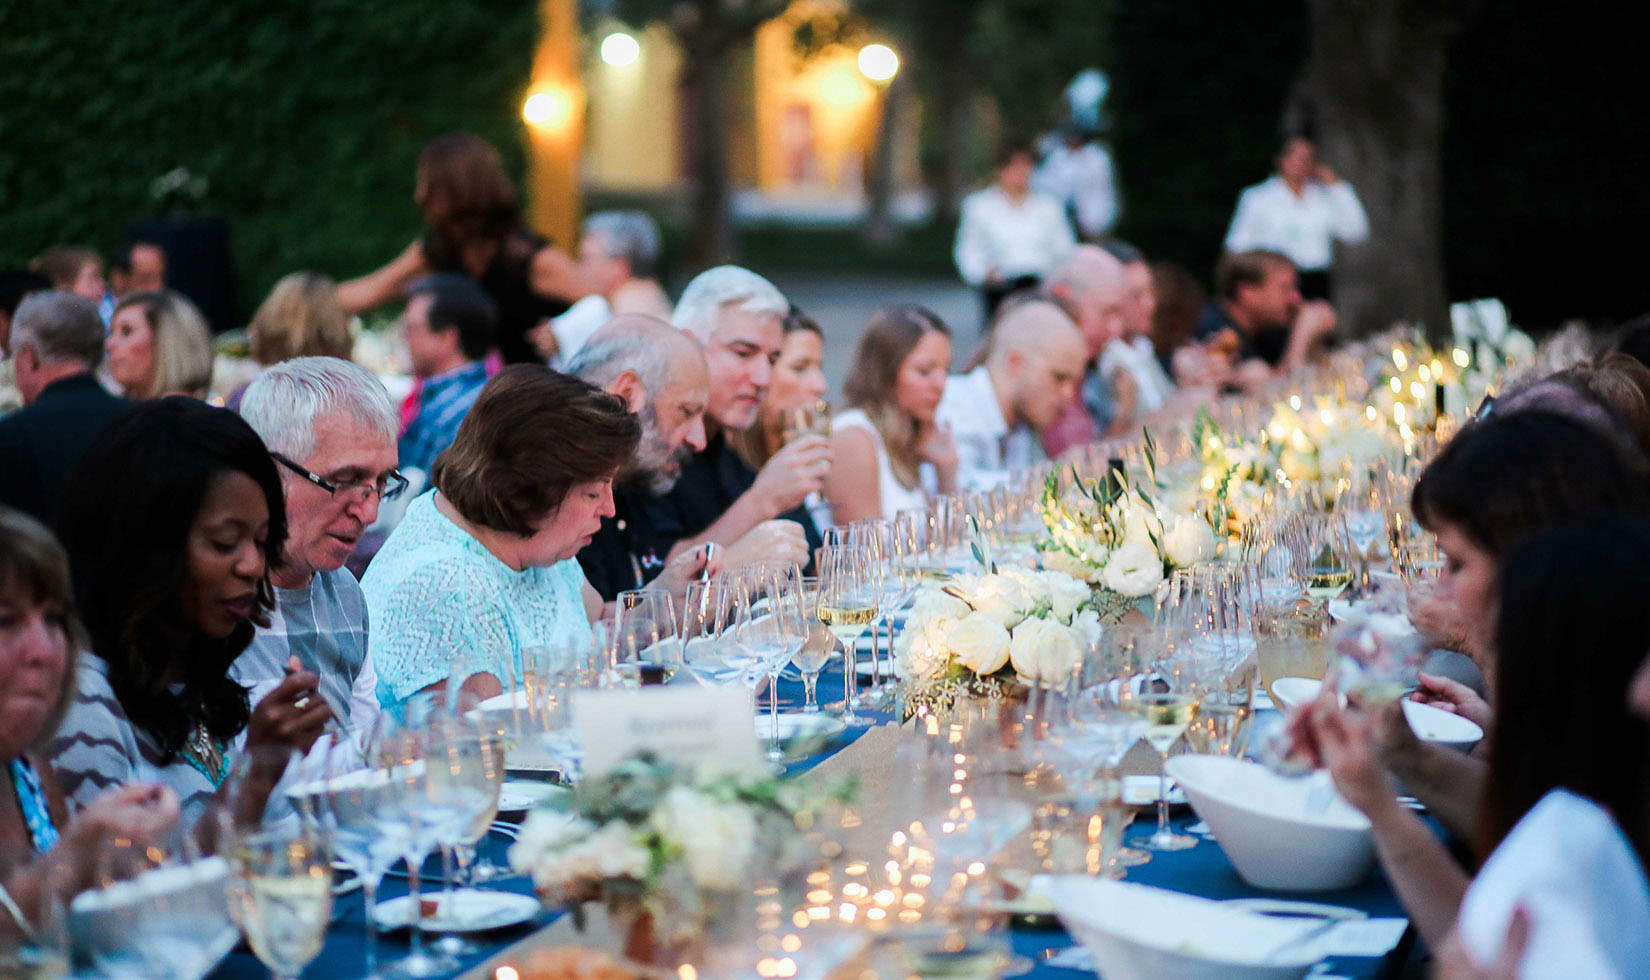 Lot of Guests enjoying alfresco dining at Jordan Winery as featured in Wine Country Table